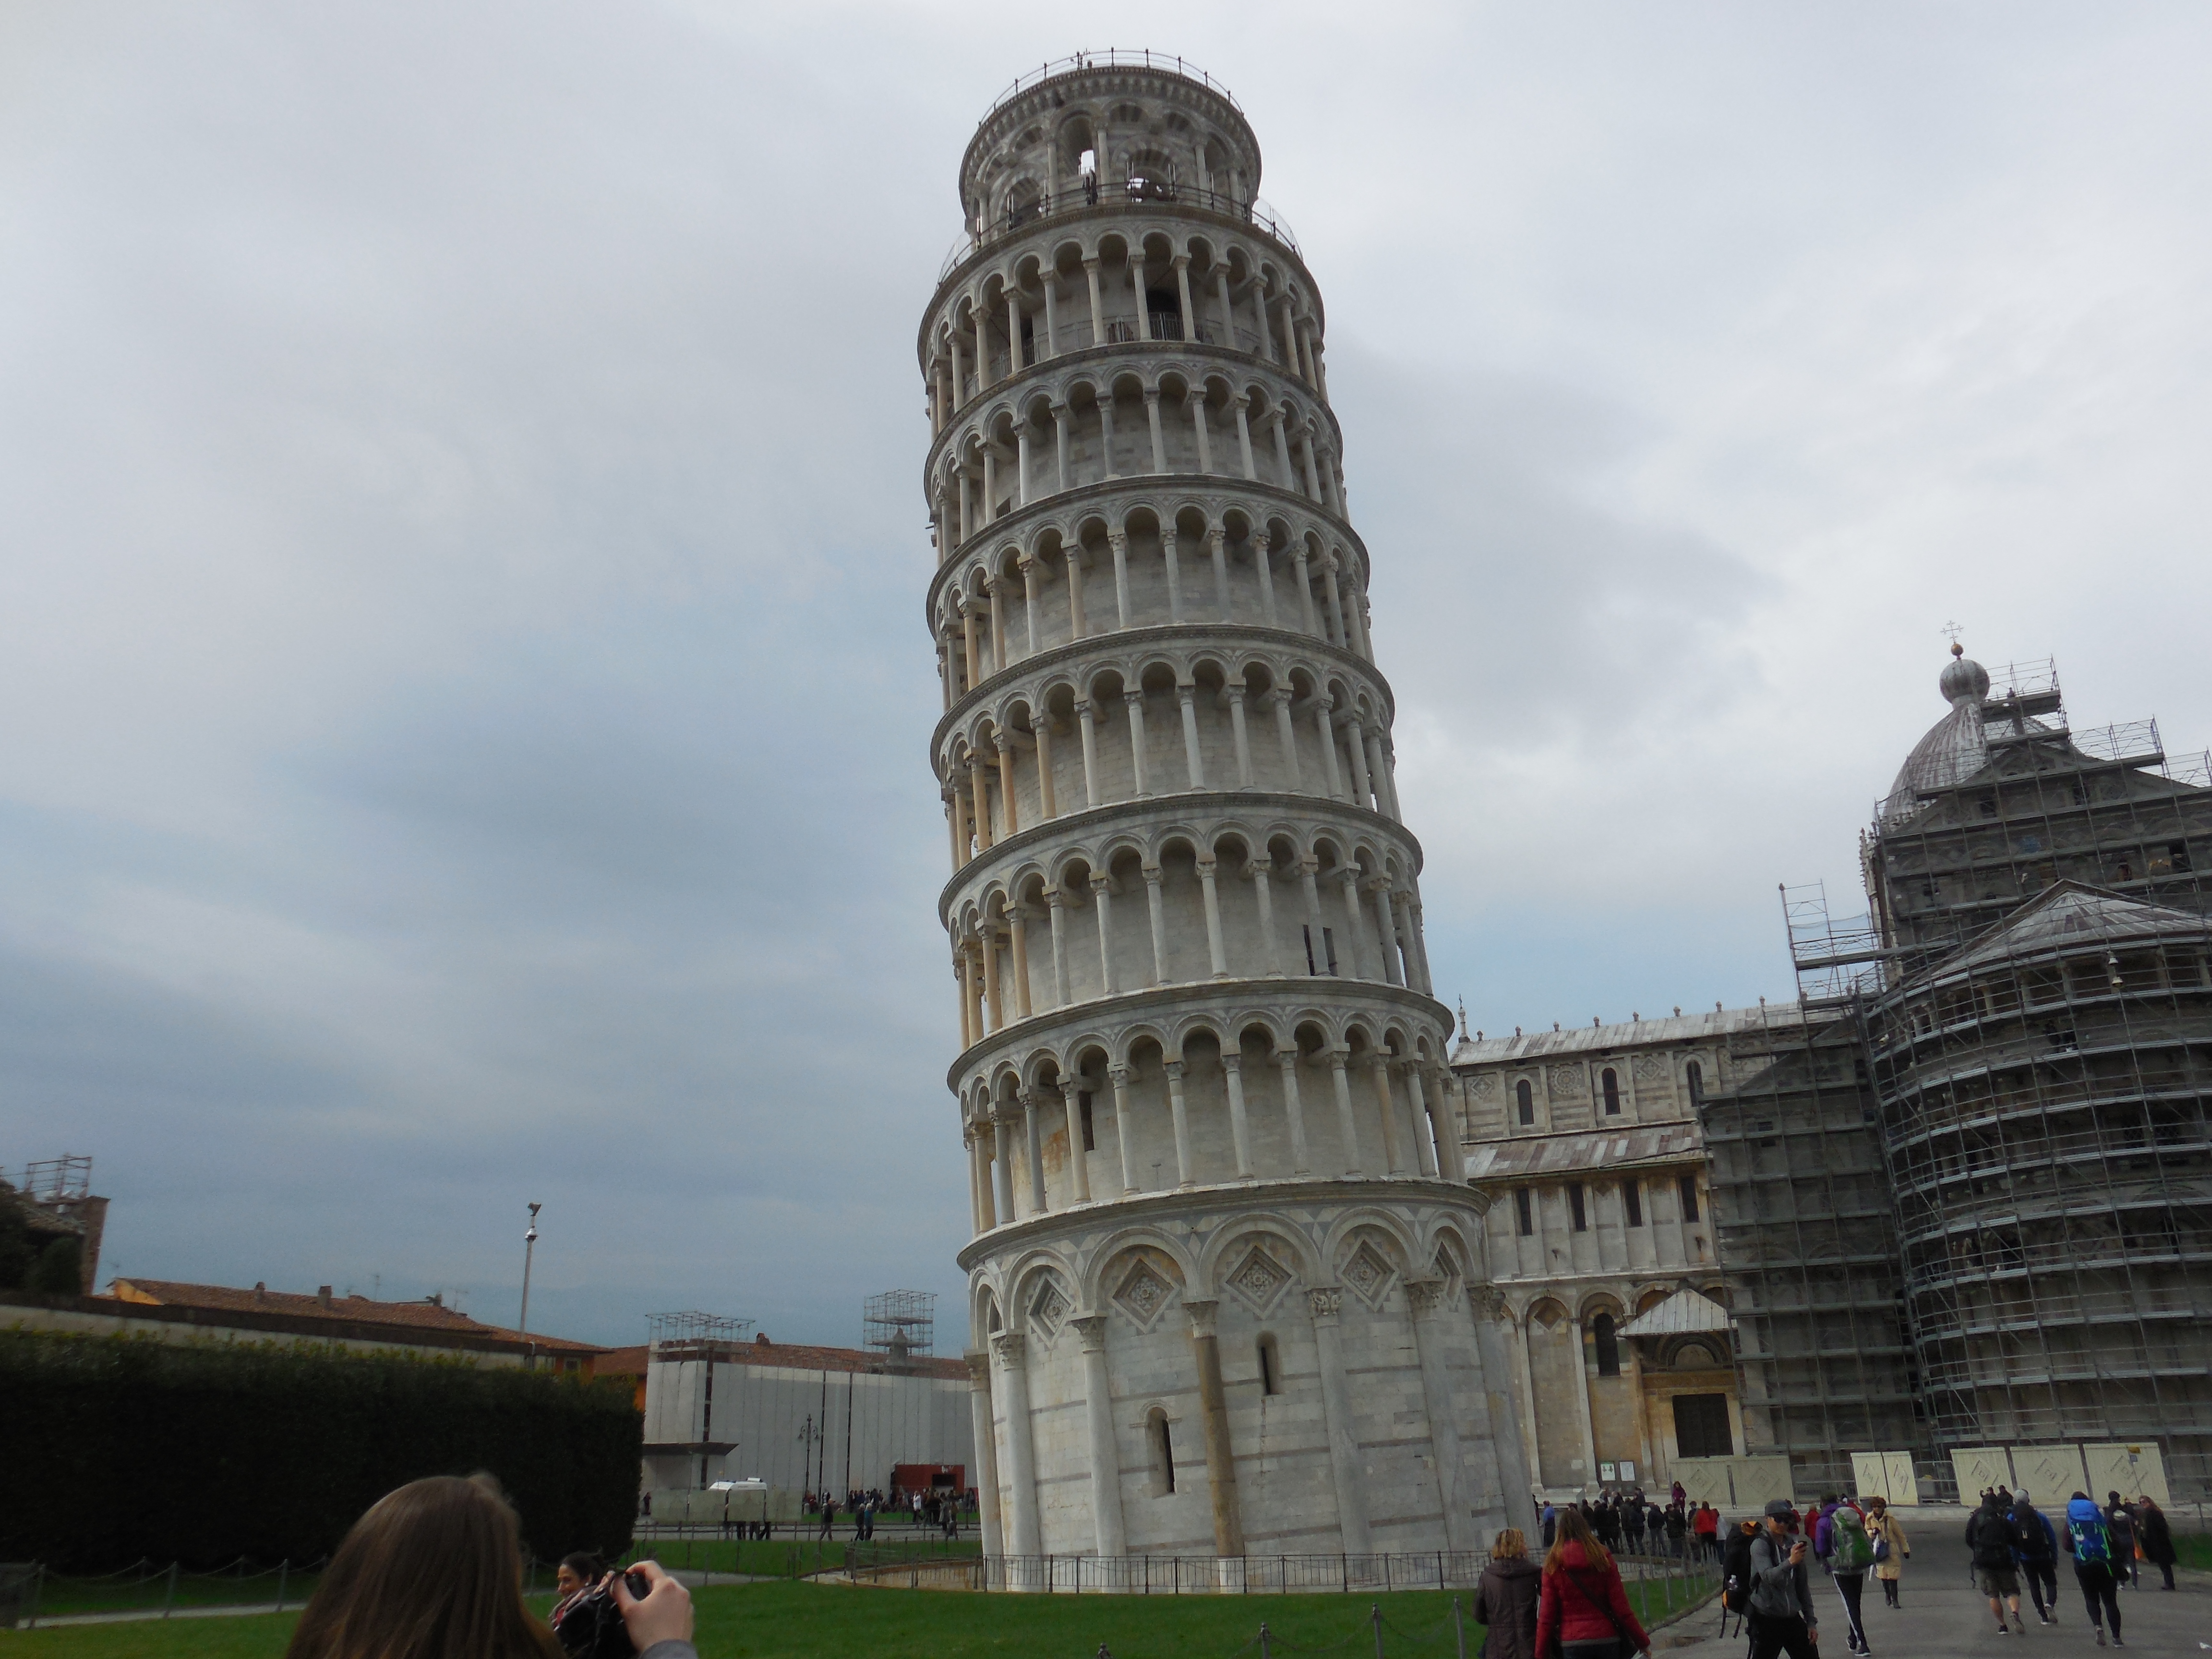 The Leaning Tower of Pisa!